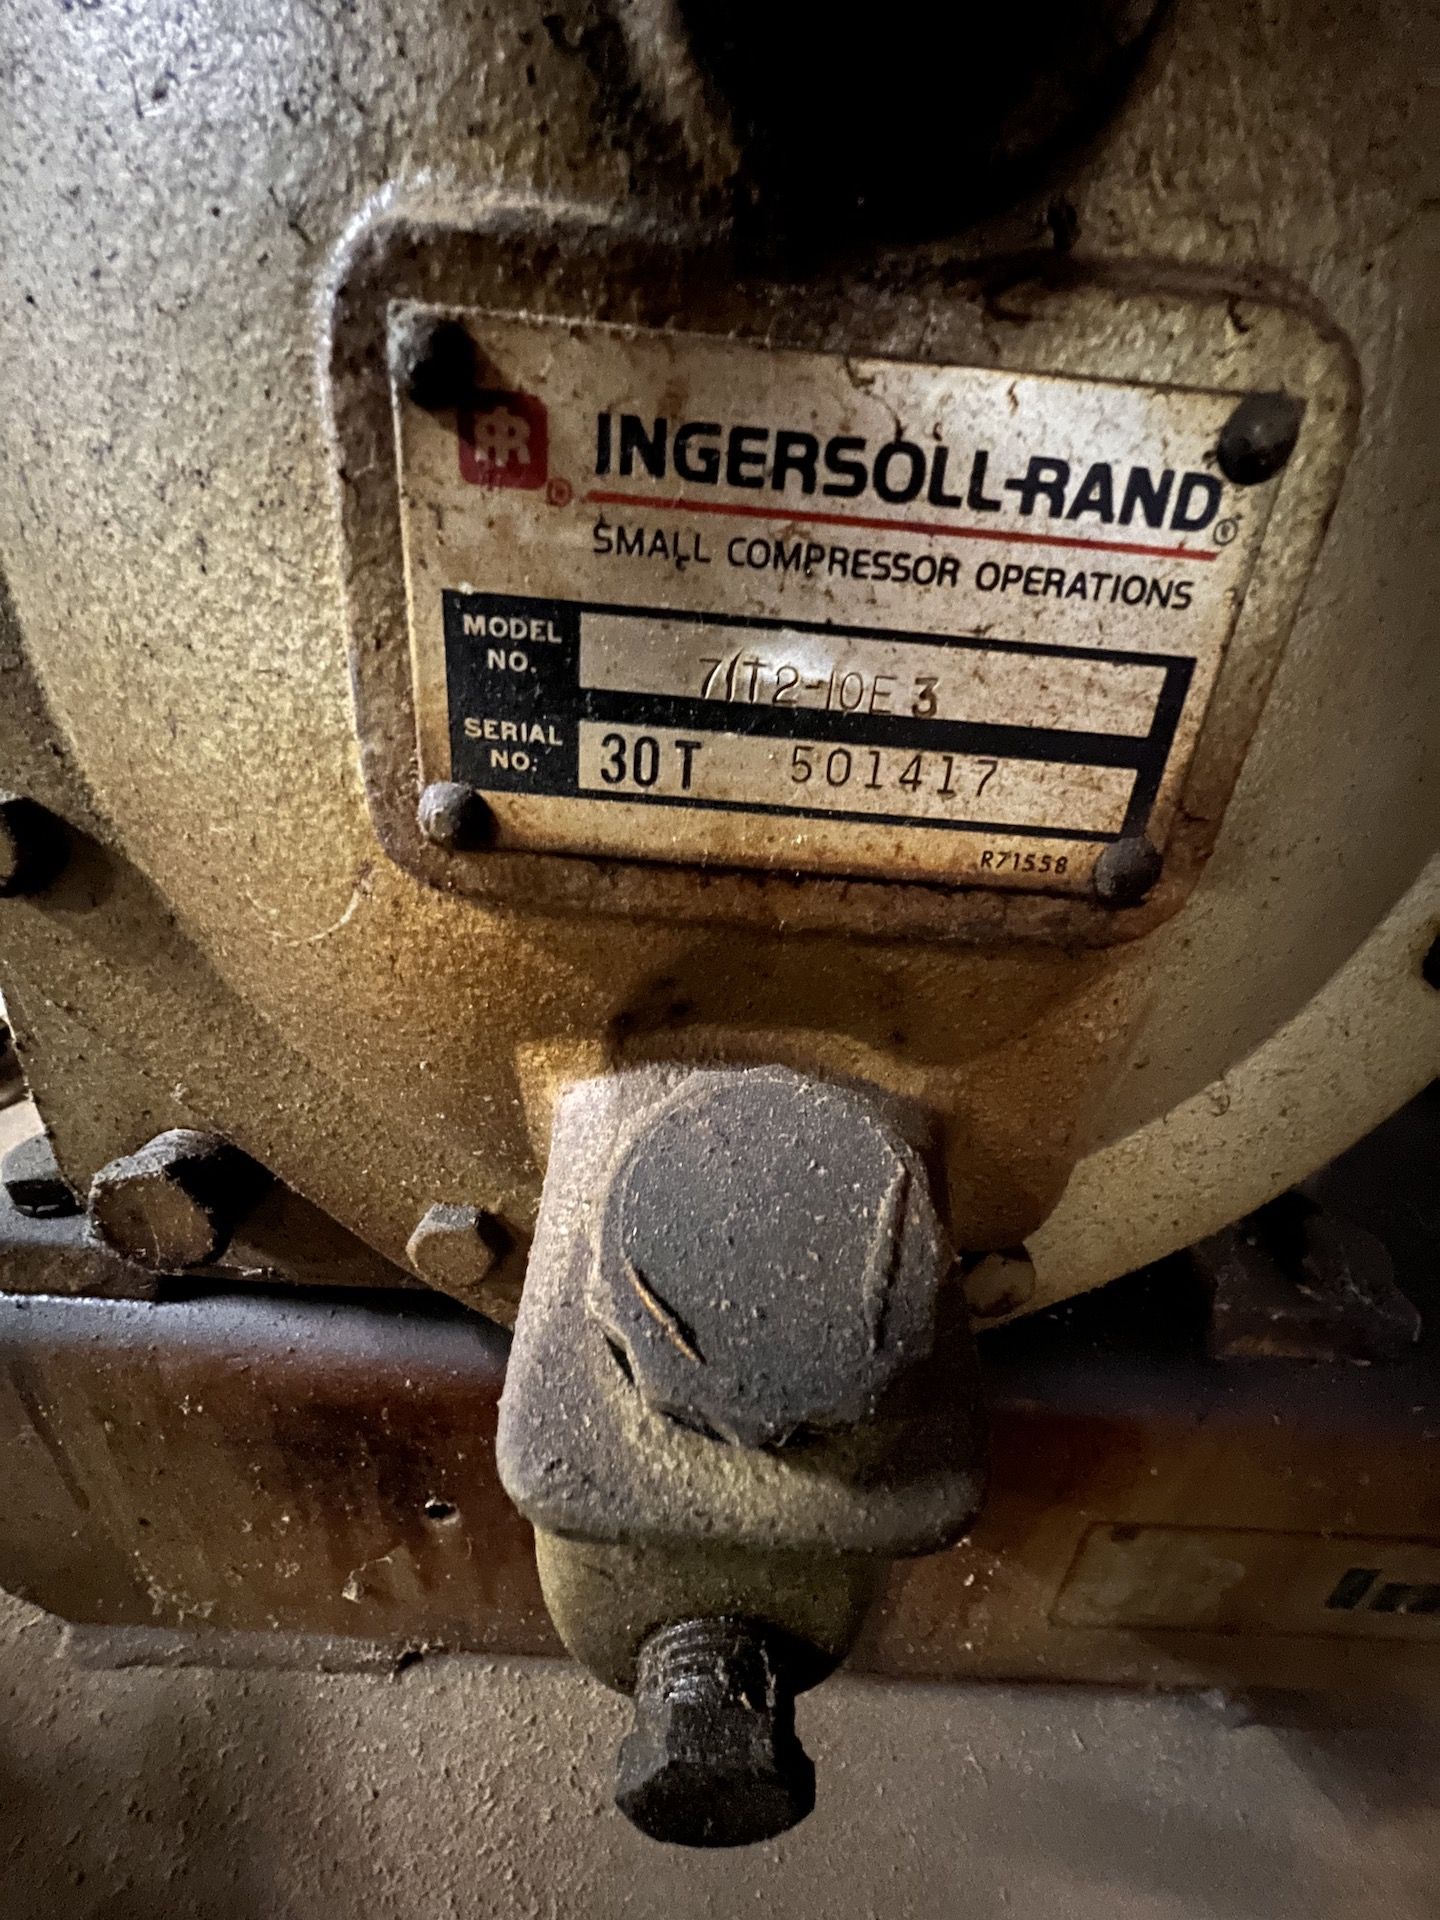 INGERSOL RAND RECIPROCATING AIR COMPRESSOR, MODEL 71T2-10E3, S/N 30T 501417, 10 HP, 1760 RPM - Image 4 of 5